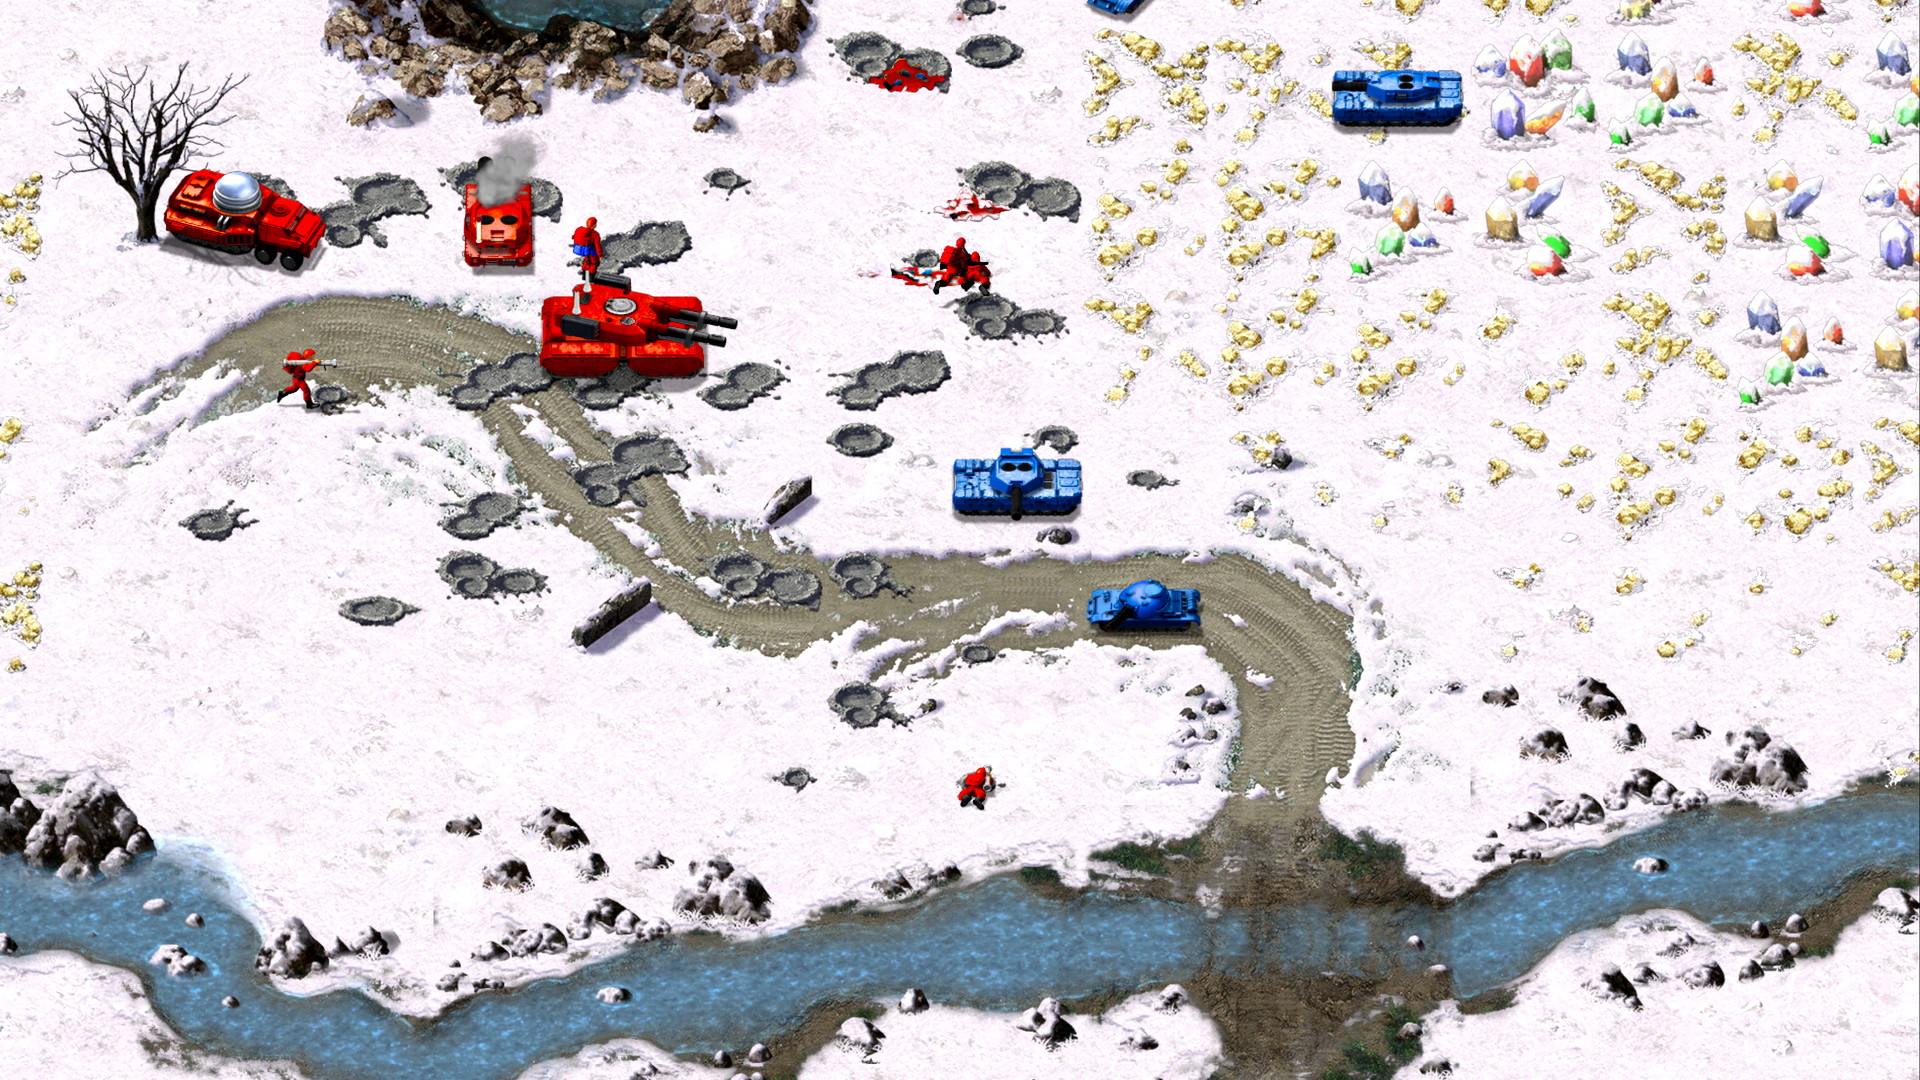 Command & Conquer: Remastered Collection - screenshot 1